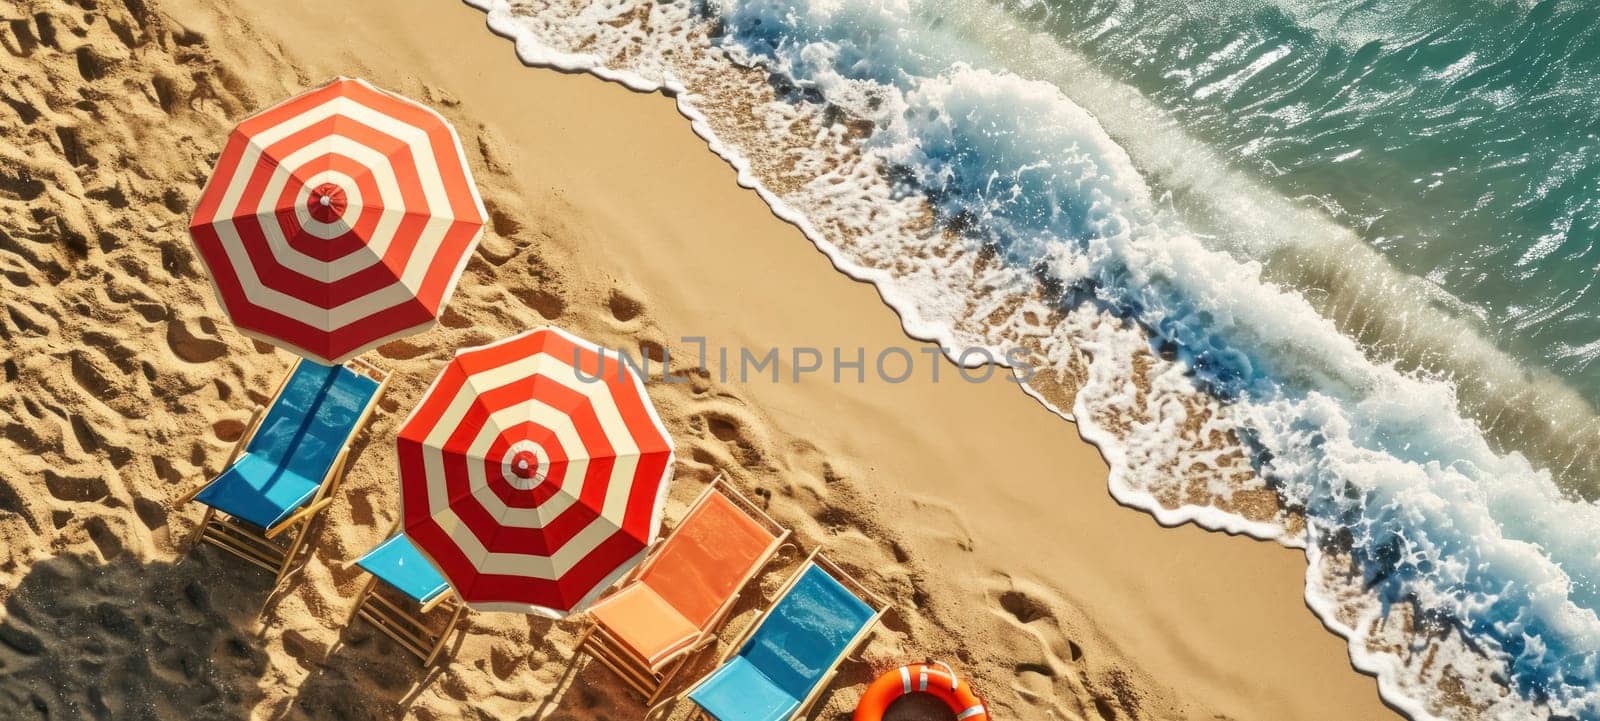 Aerial view of striped umbrellas, beach chairs, and waves on sandy shore